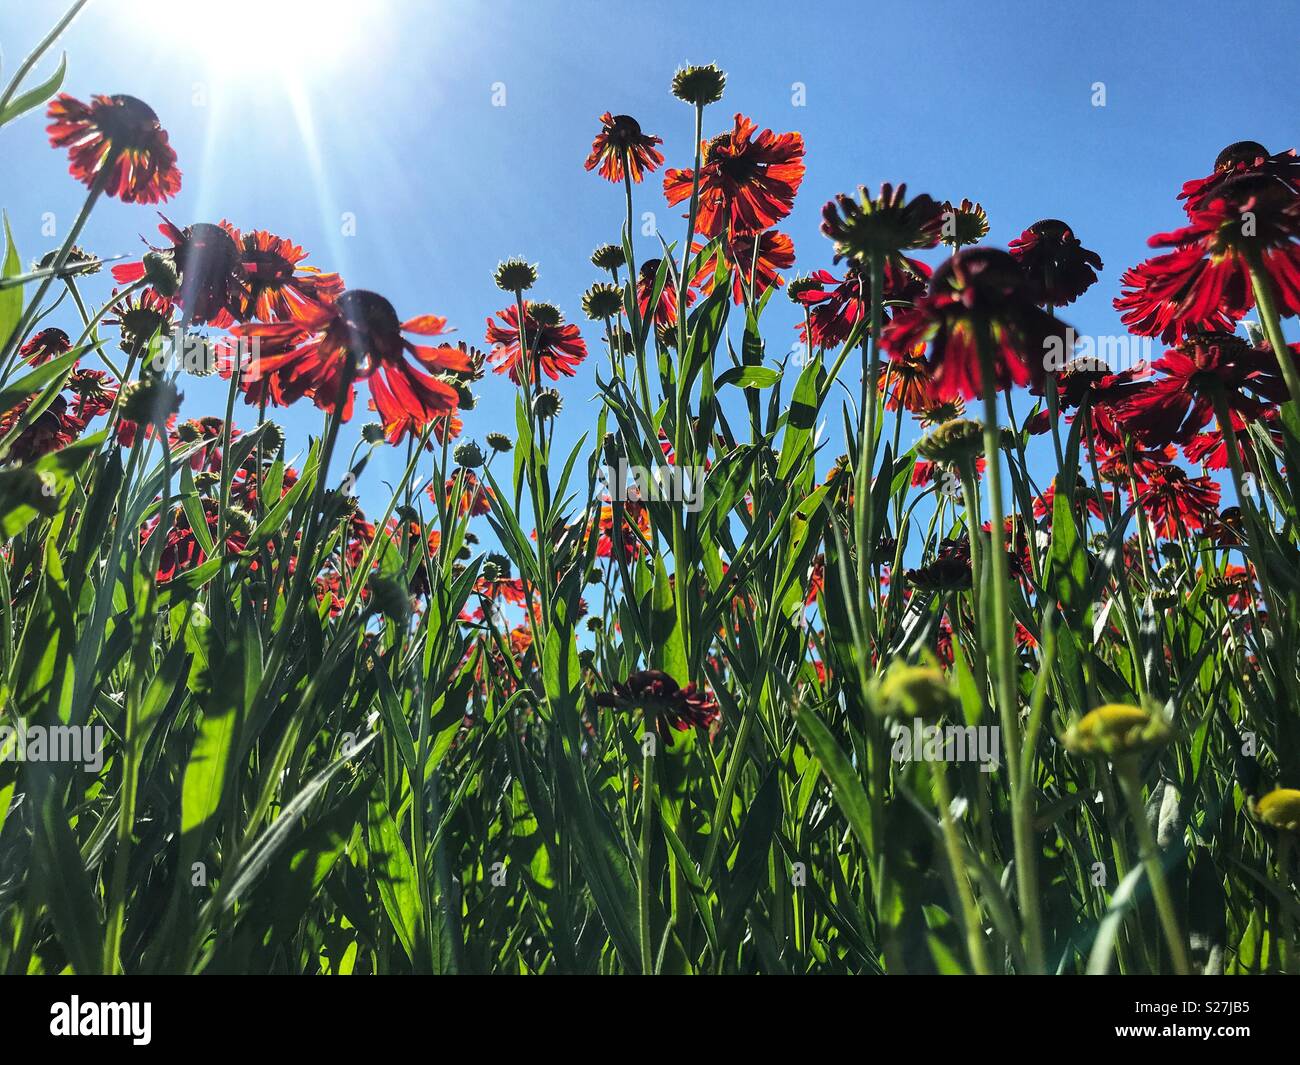 Cone flowers against blue sky, low angle view Stock Photo